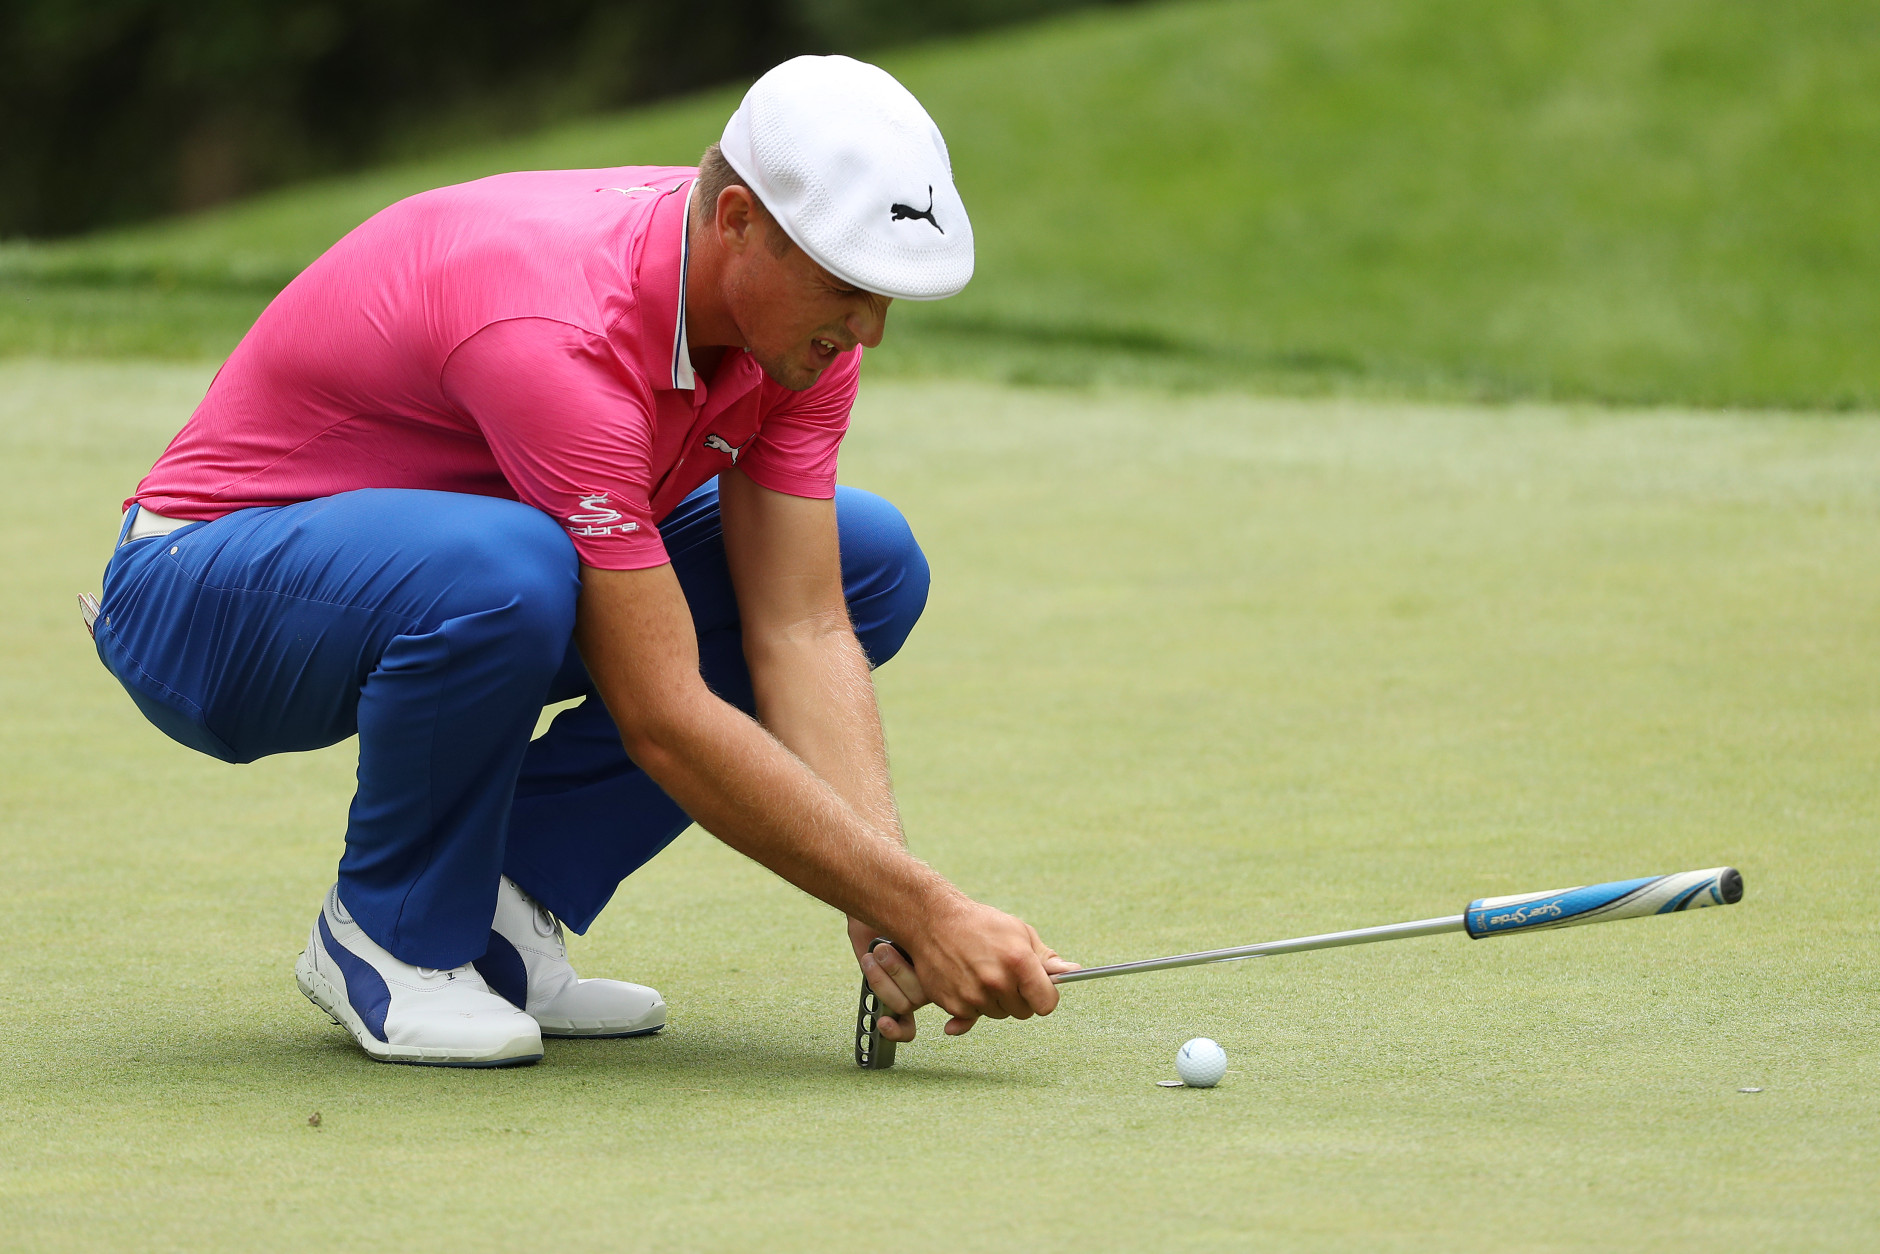 BETHESDA, MD - JUNE 24:  Bryson DeChambeau lines up a putt on the 14th green during the second round of the Quicken Loans National at Congressional Country Club on June 24, 2016 in Bethesda, Maryland.  (Photo by Patrick Smith/Getty Images)